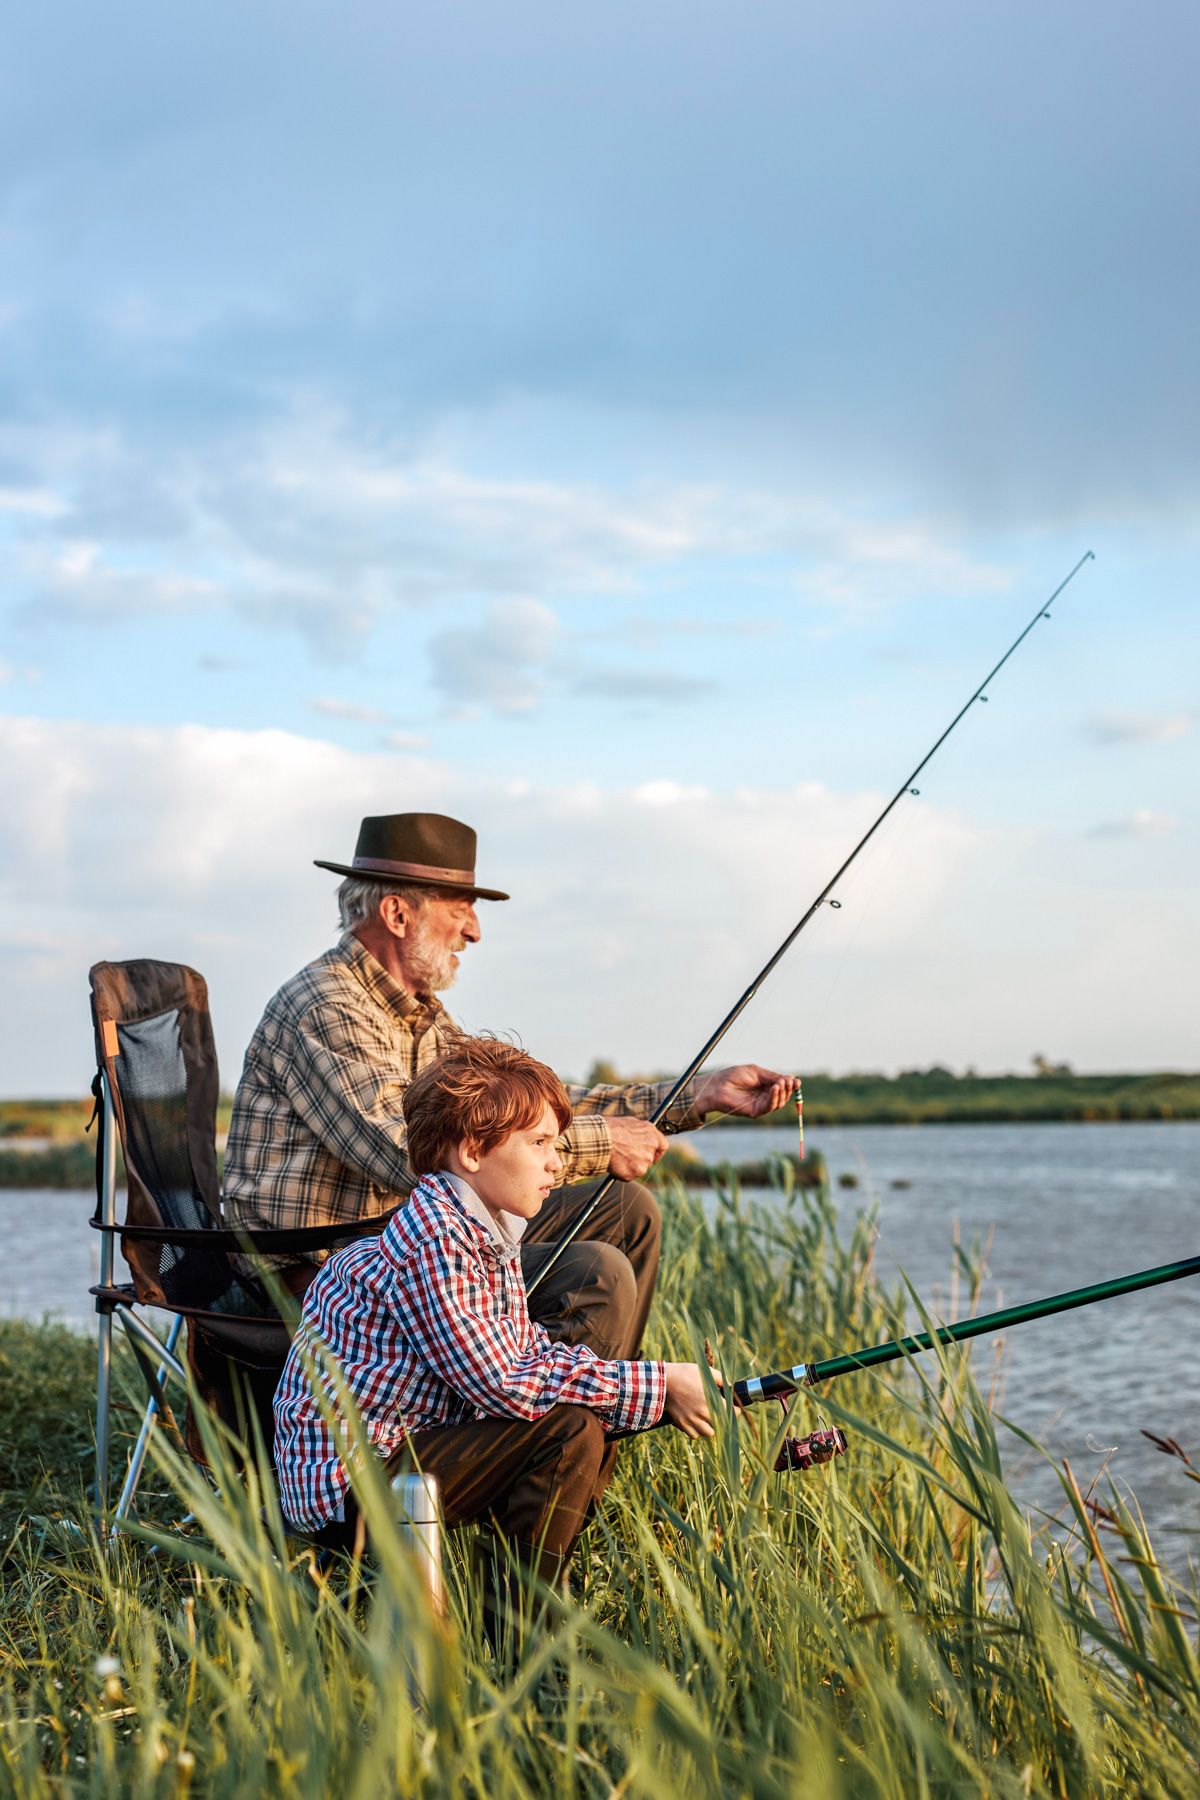 An older man in a brown, brimmed hat holding a fishing pole sits in a chair in tall grass on the banks of a lake with a young, red-haired boy in a checkered shirt sitting beside him holding a fishing pole.